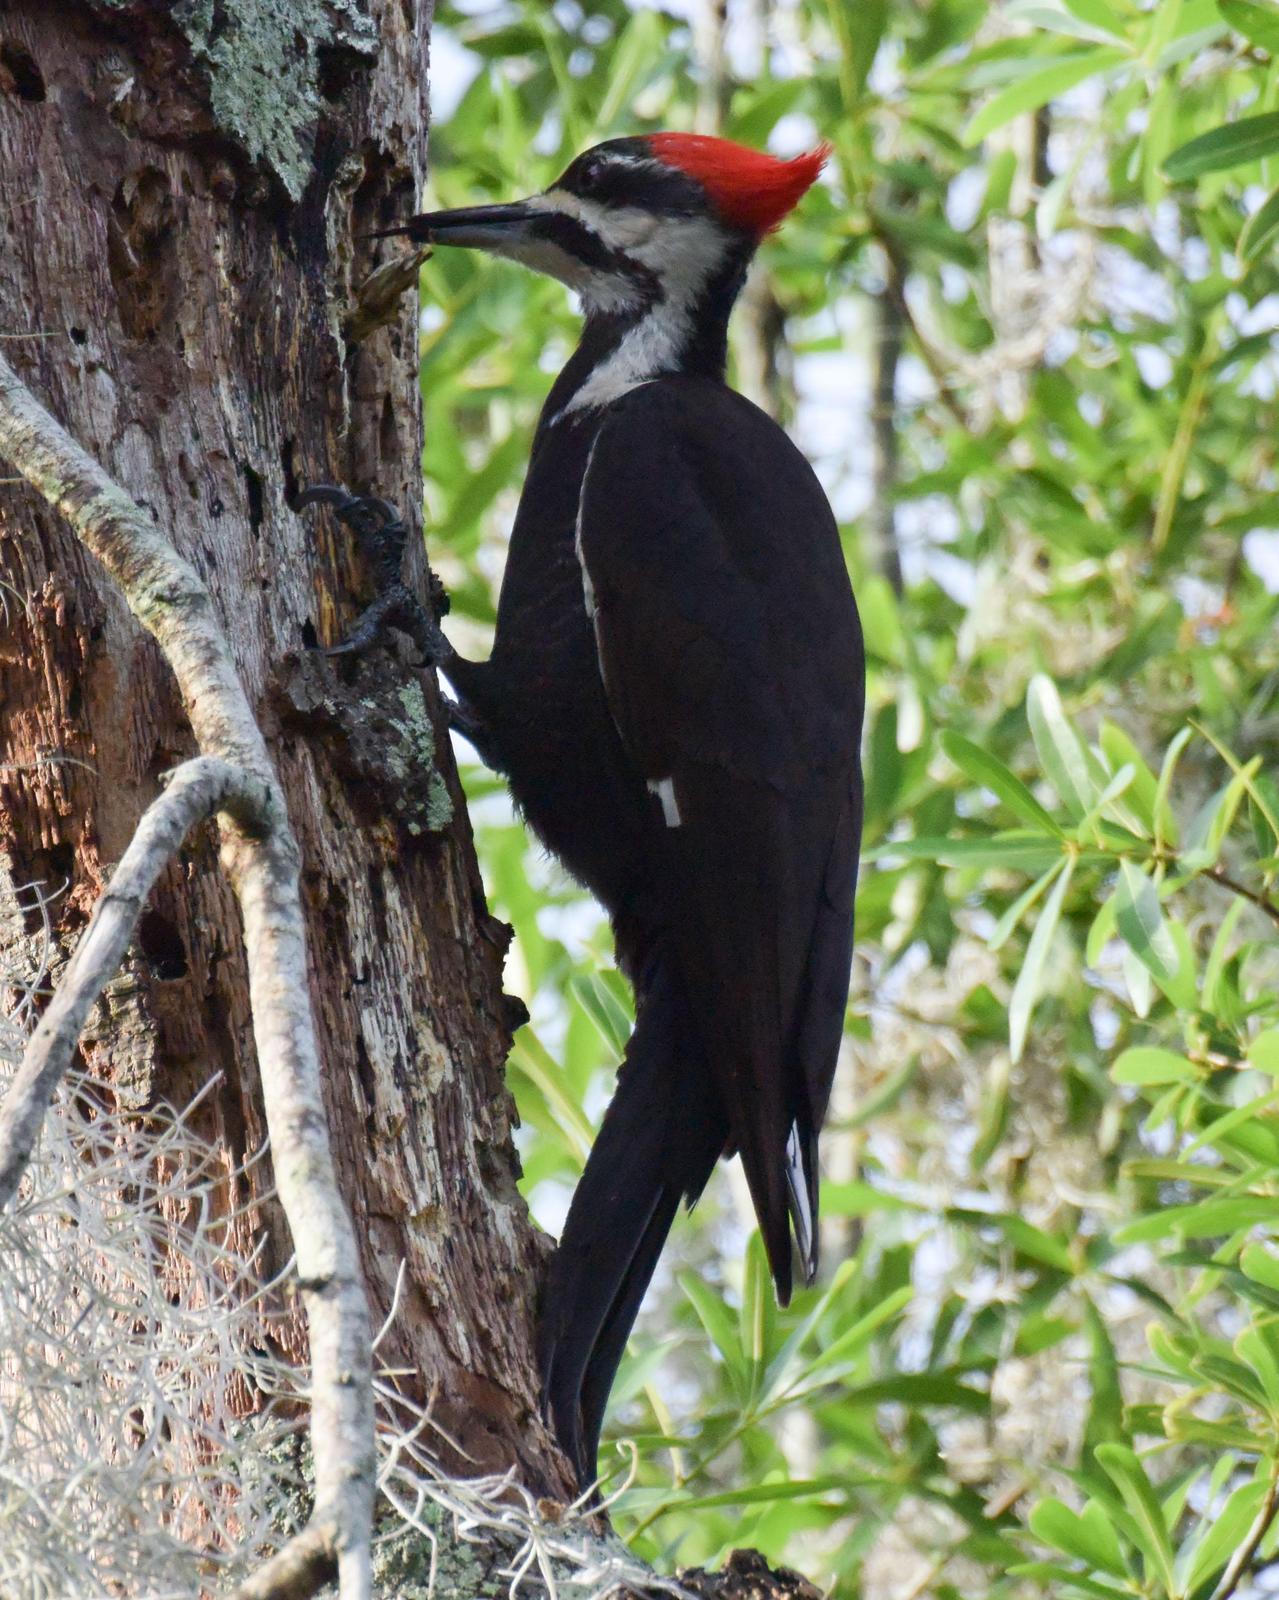 Pileated Woodpecker Photo by Emily Percival